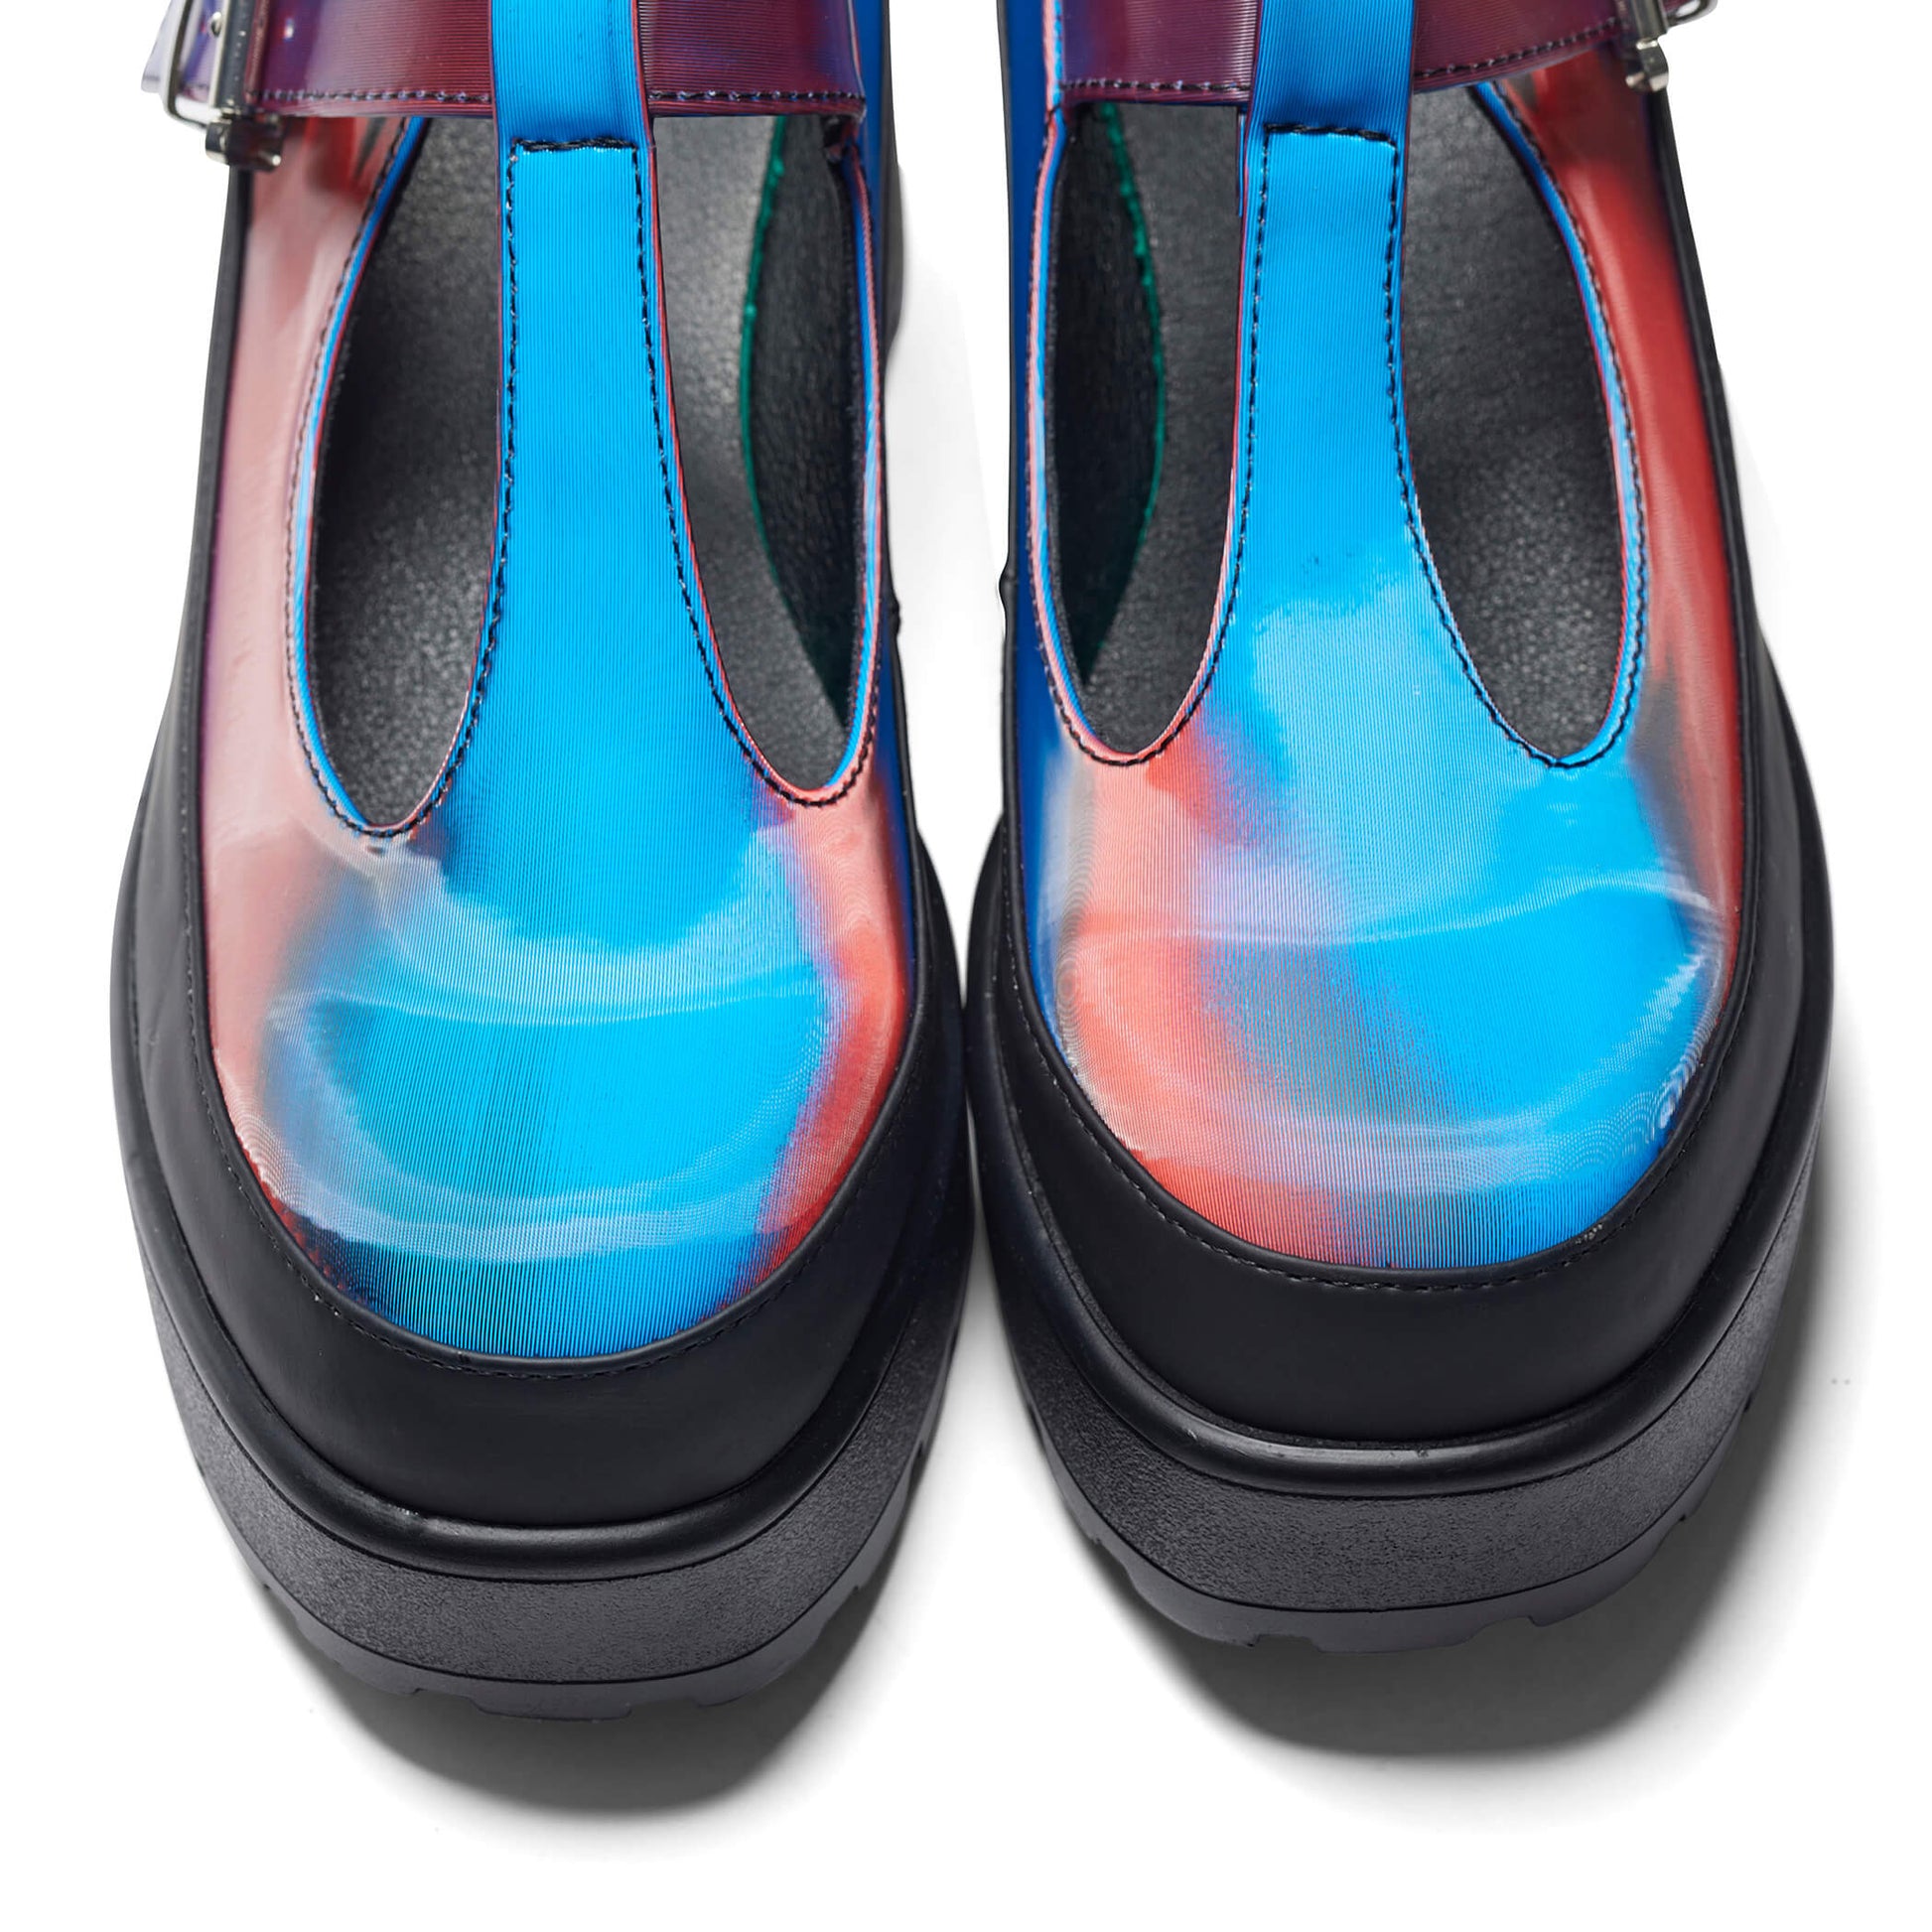 Sai Iridescent Mary Jane Shoes 'Soap Bubbles Edition' - Multi - KOI Footwear - Top View